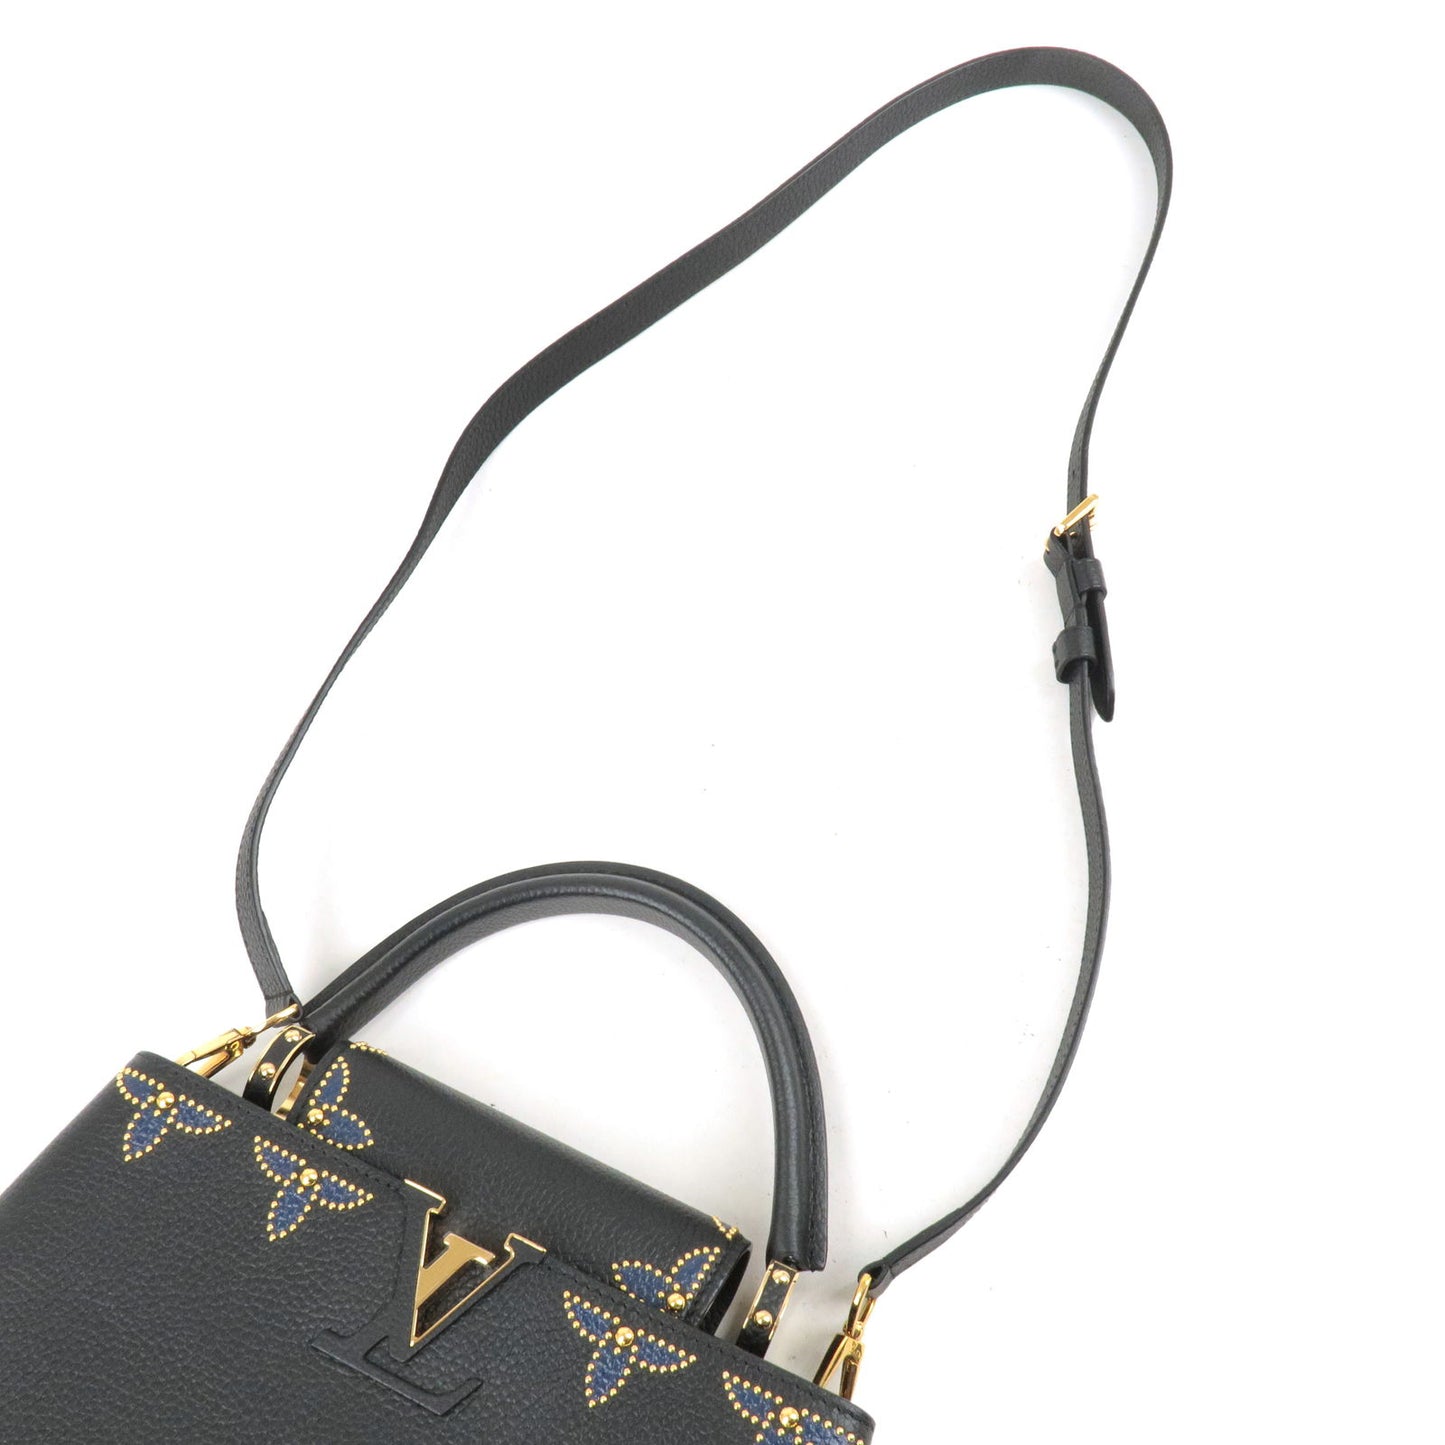 Louis-Vuitton-Studded-Capucines-PM-2Way-Hand-Bag-M52138 – dct